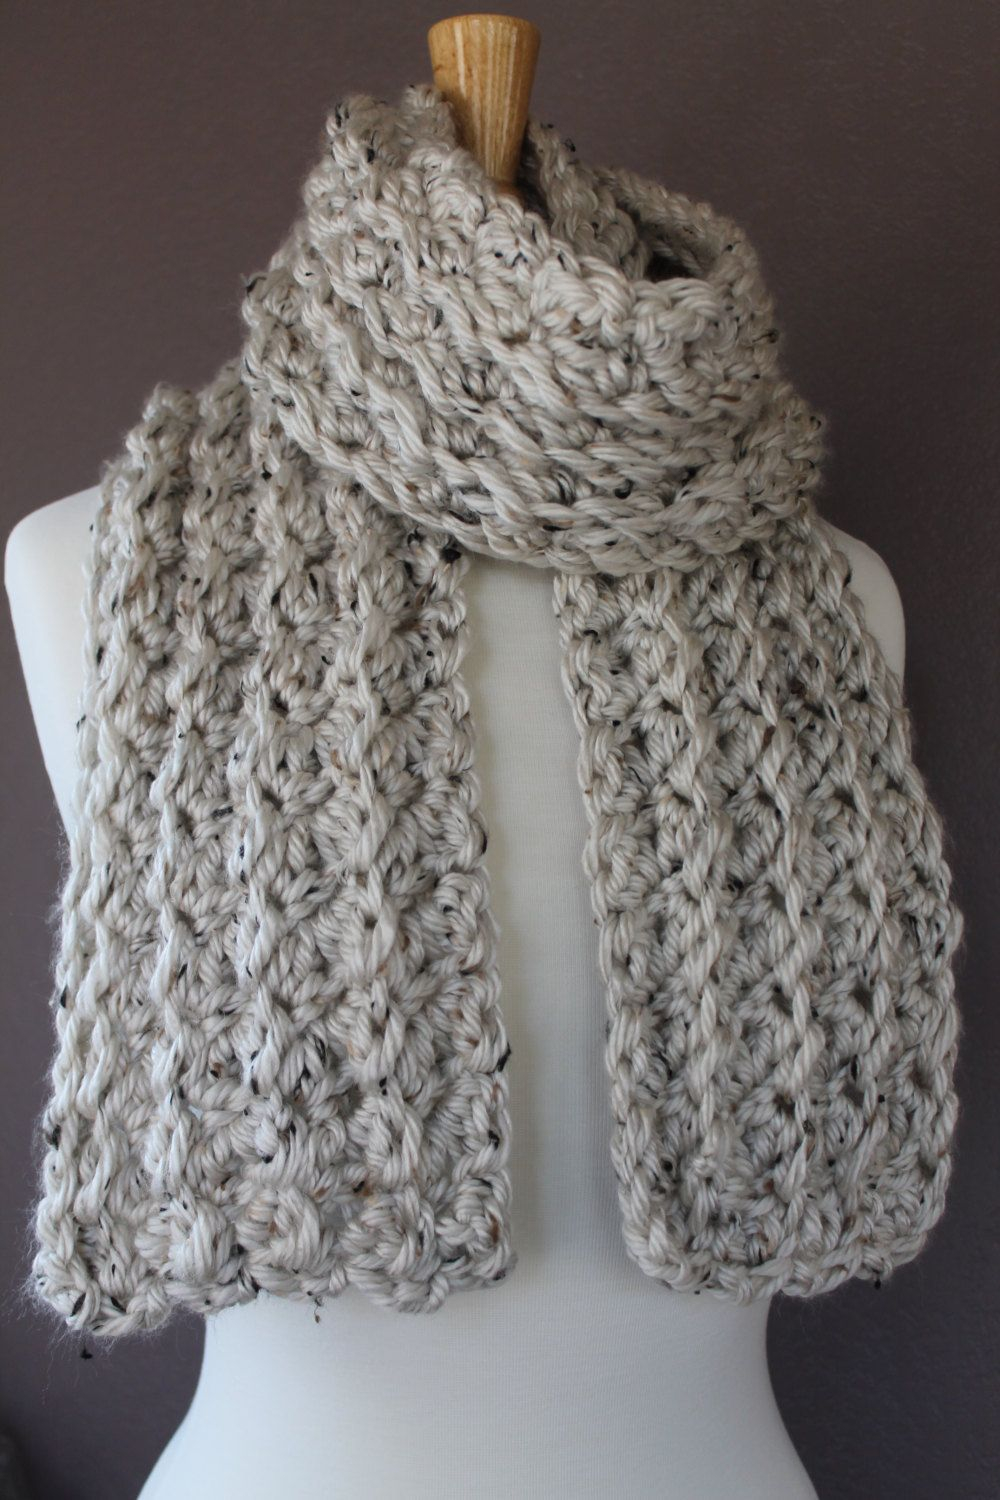 Chunky Scarf Crochet Pattern Come And Check Out This Very Easy Crochet Scarf Pattern From Crafty